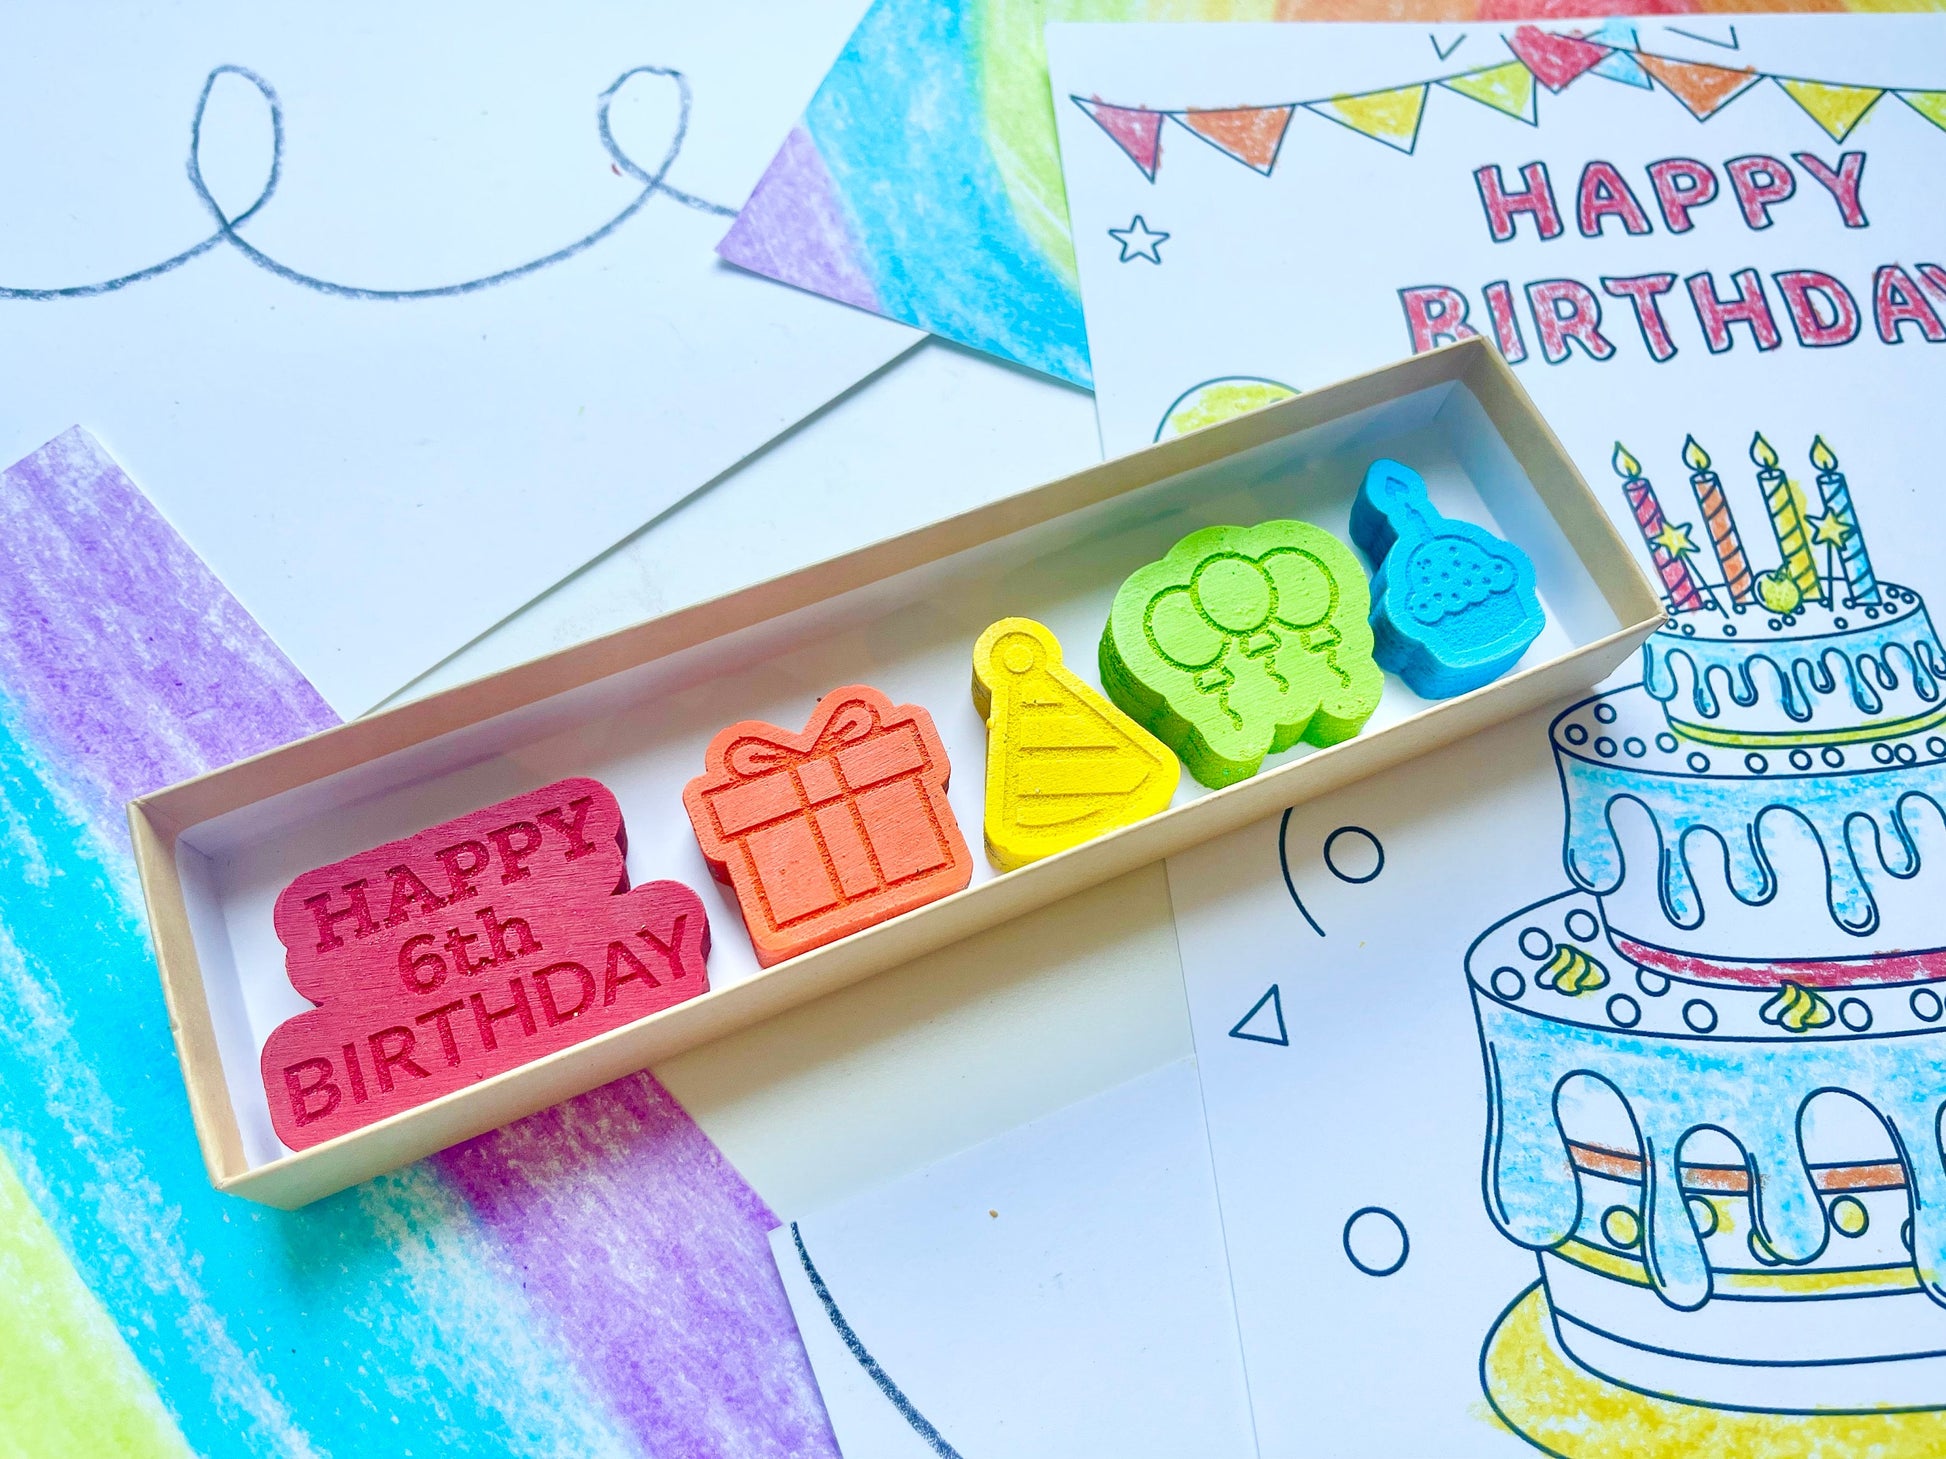 6th Birthday Crayons - 6th Birthday Gifts - Kids Happy Birthday Gifts - Kids Birthday Presents - Gifts For Kids - 6th Birthday Party Favors